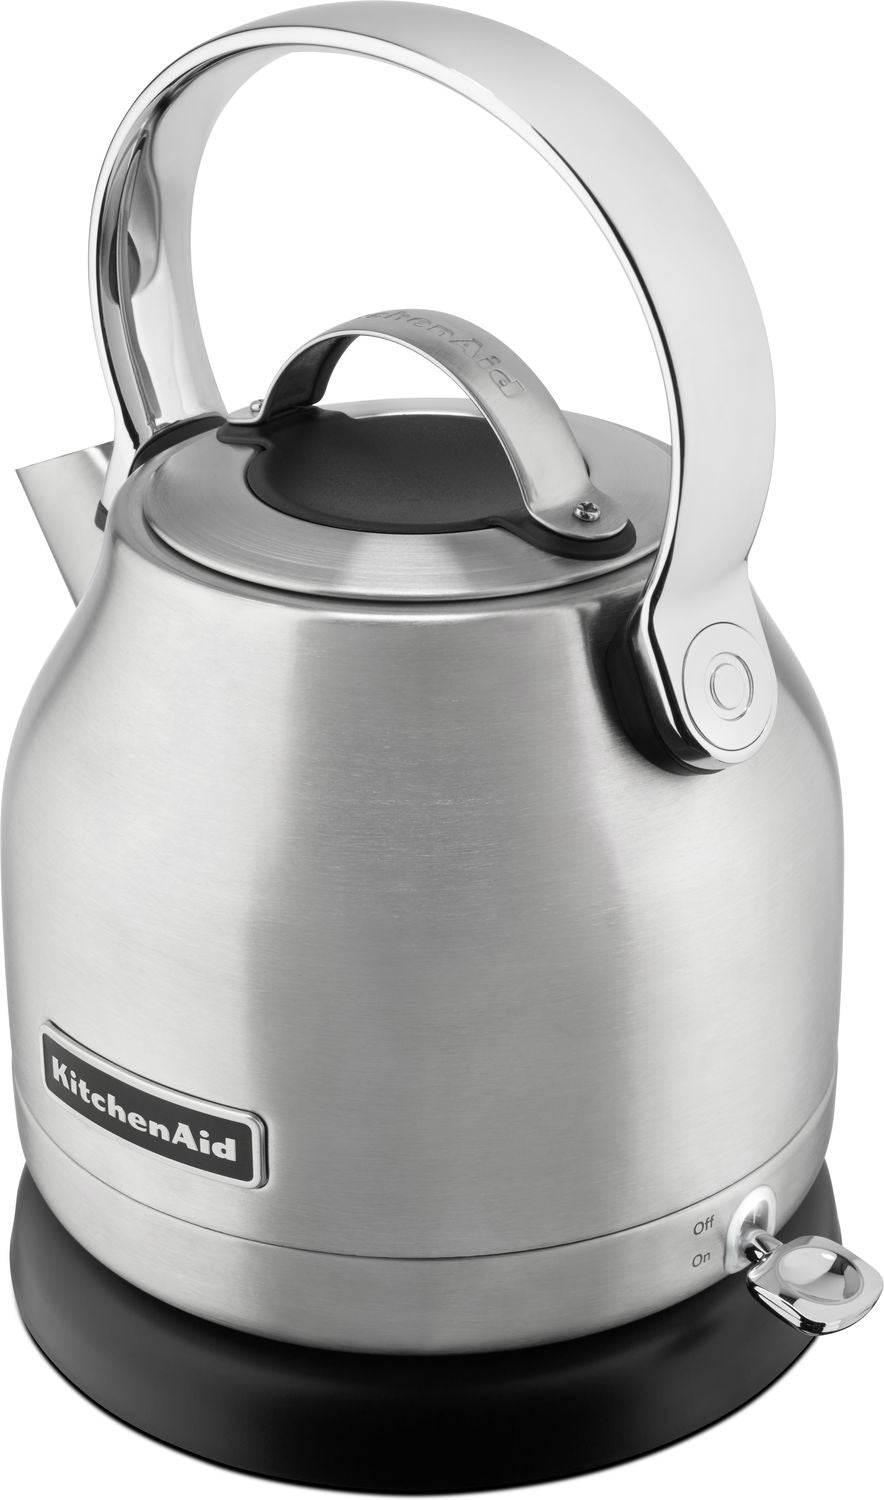 KitchenAid Brushed Stainless Steel Electric Kettle (1.25 L) - KEK1222SX